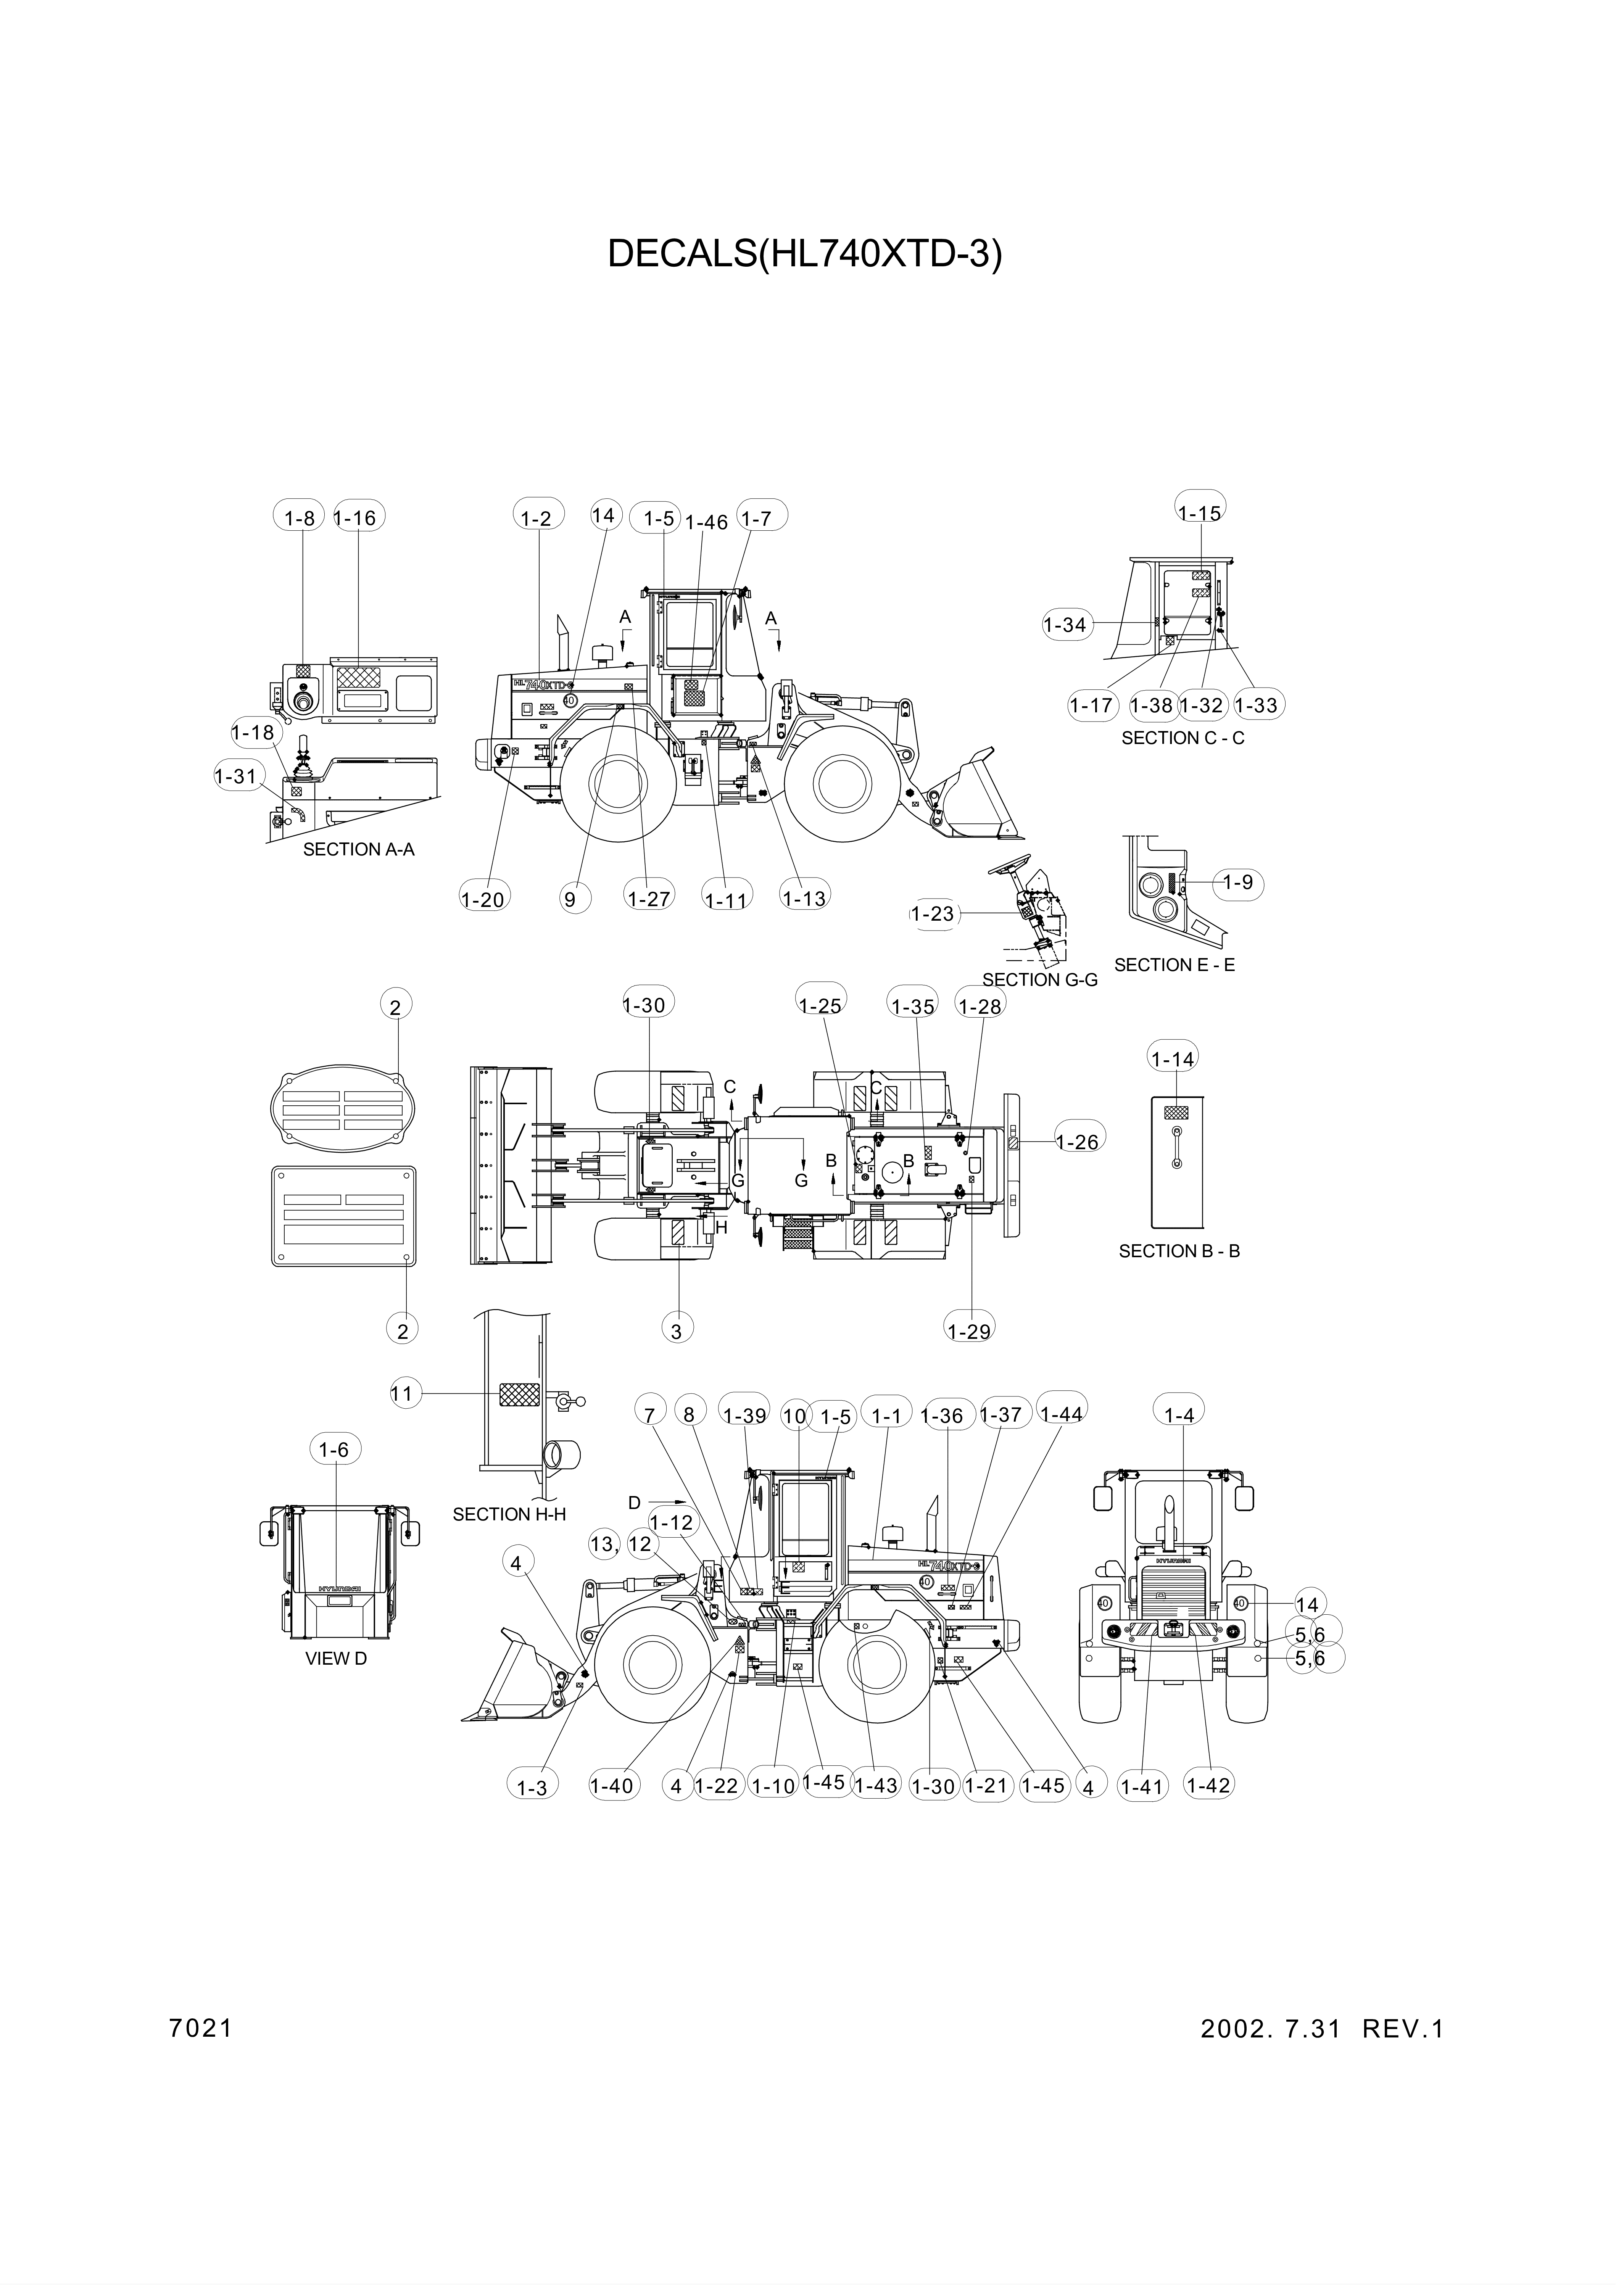 drawing for Hyundai Construction Equipment 94L3-00091 - DECAL-CONTROL IDEOGRAM (figure 5)